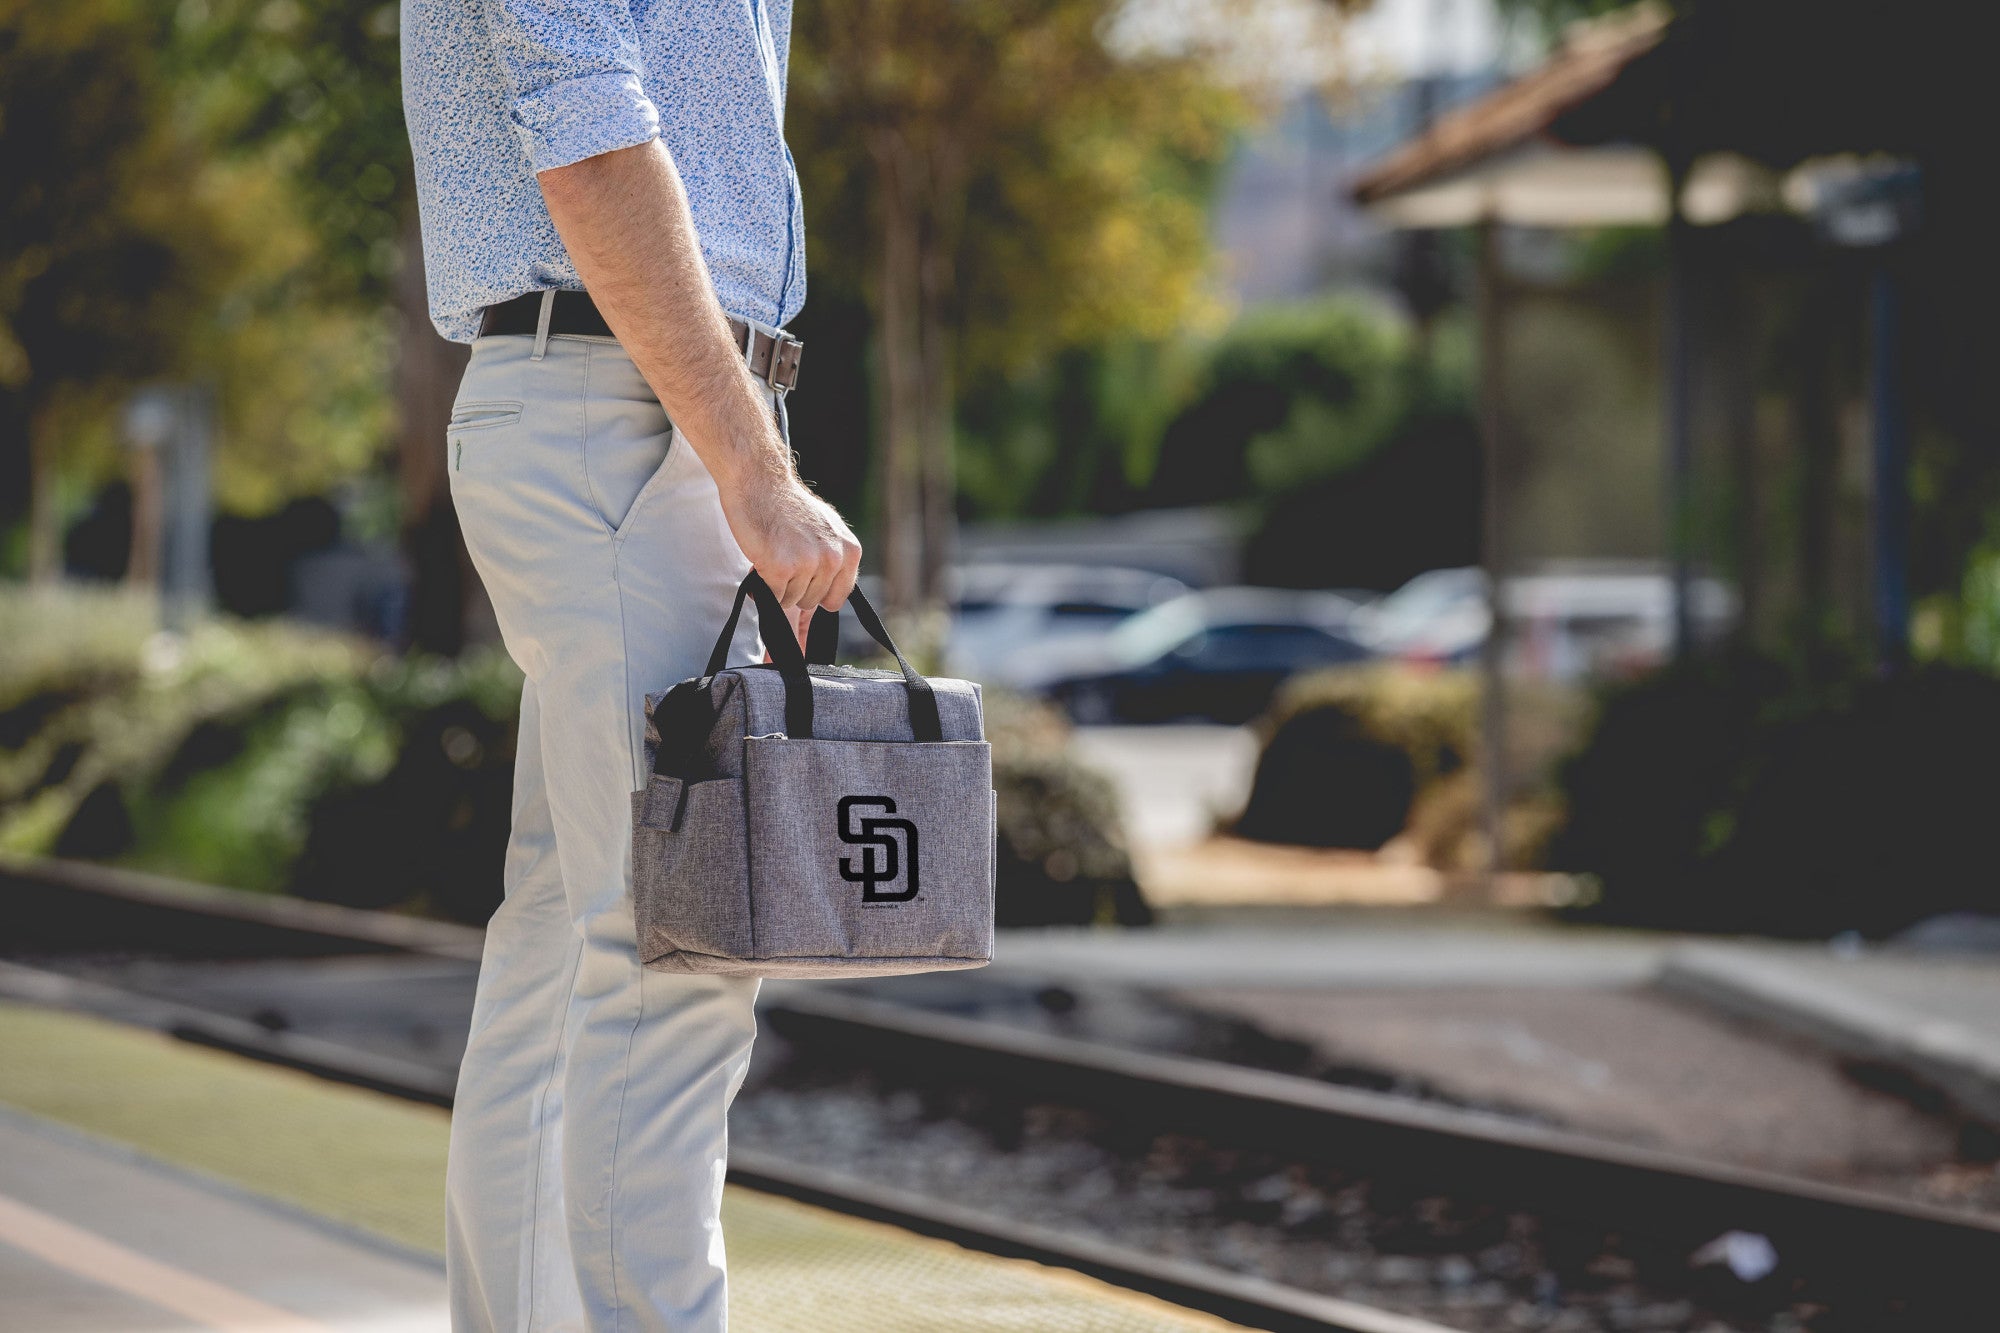 San Diego Padres - On The Go Lunch Bag Cooler